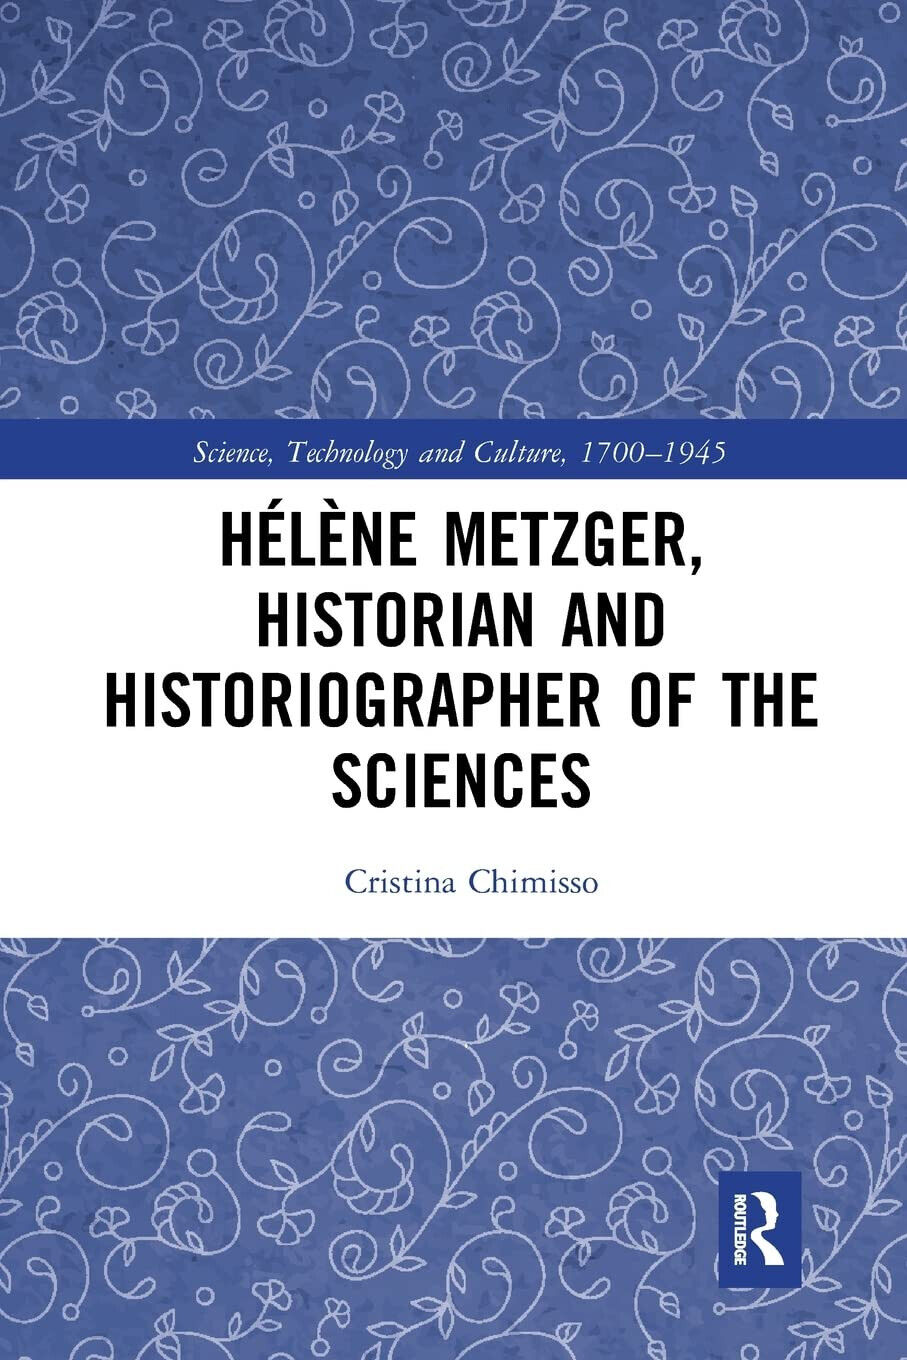 Helene Metzger, Historian And Historiographer Of The Sciences - 2021